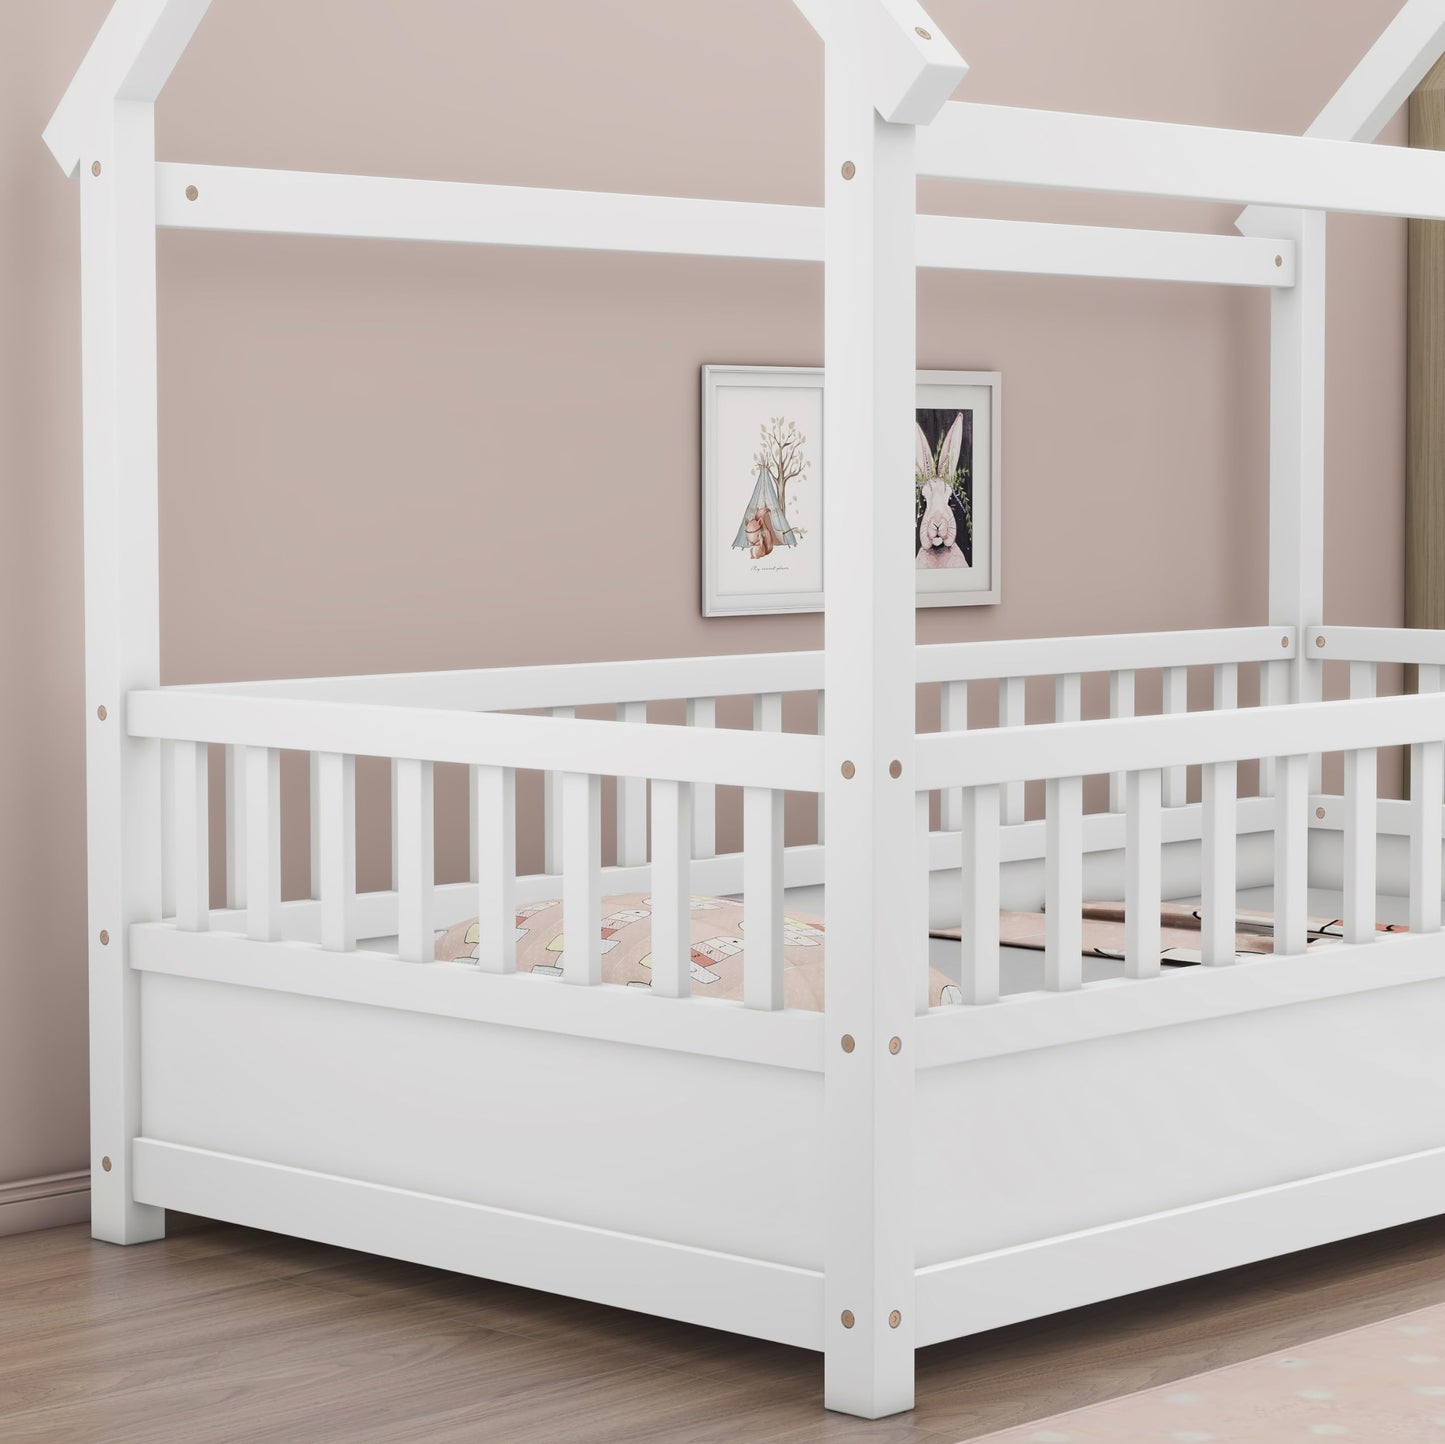 Montessori Floor Bed Twin Size, Twin Montessori Bed with Fence, Twin Size House Bed for Kids, Girls, Boys, Twin Floor Bed White